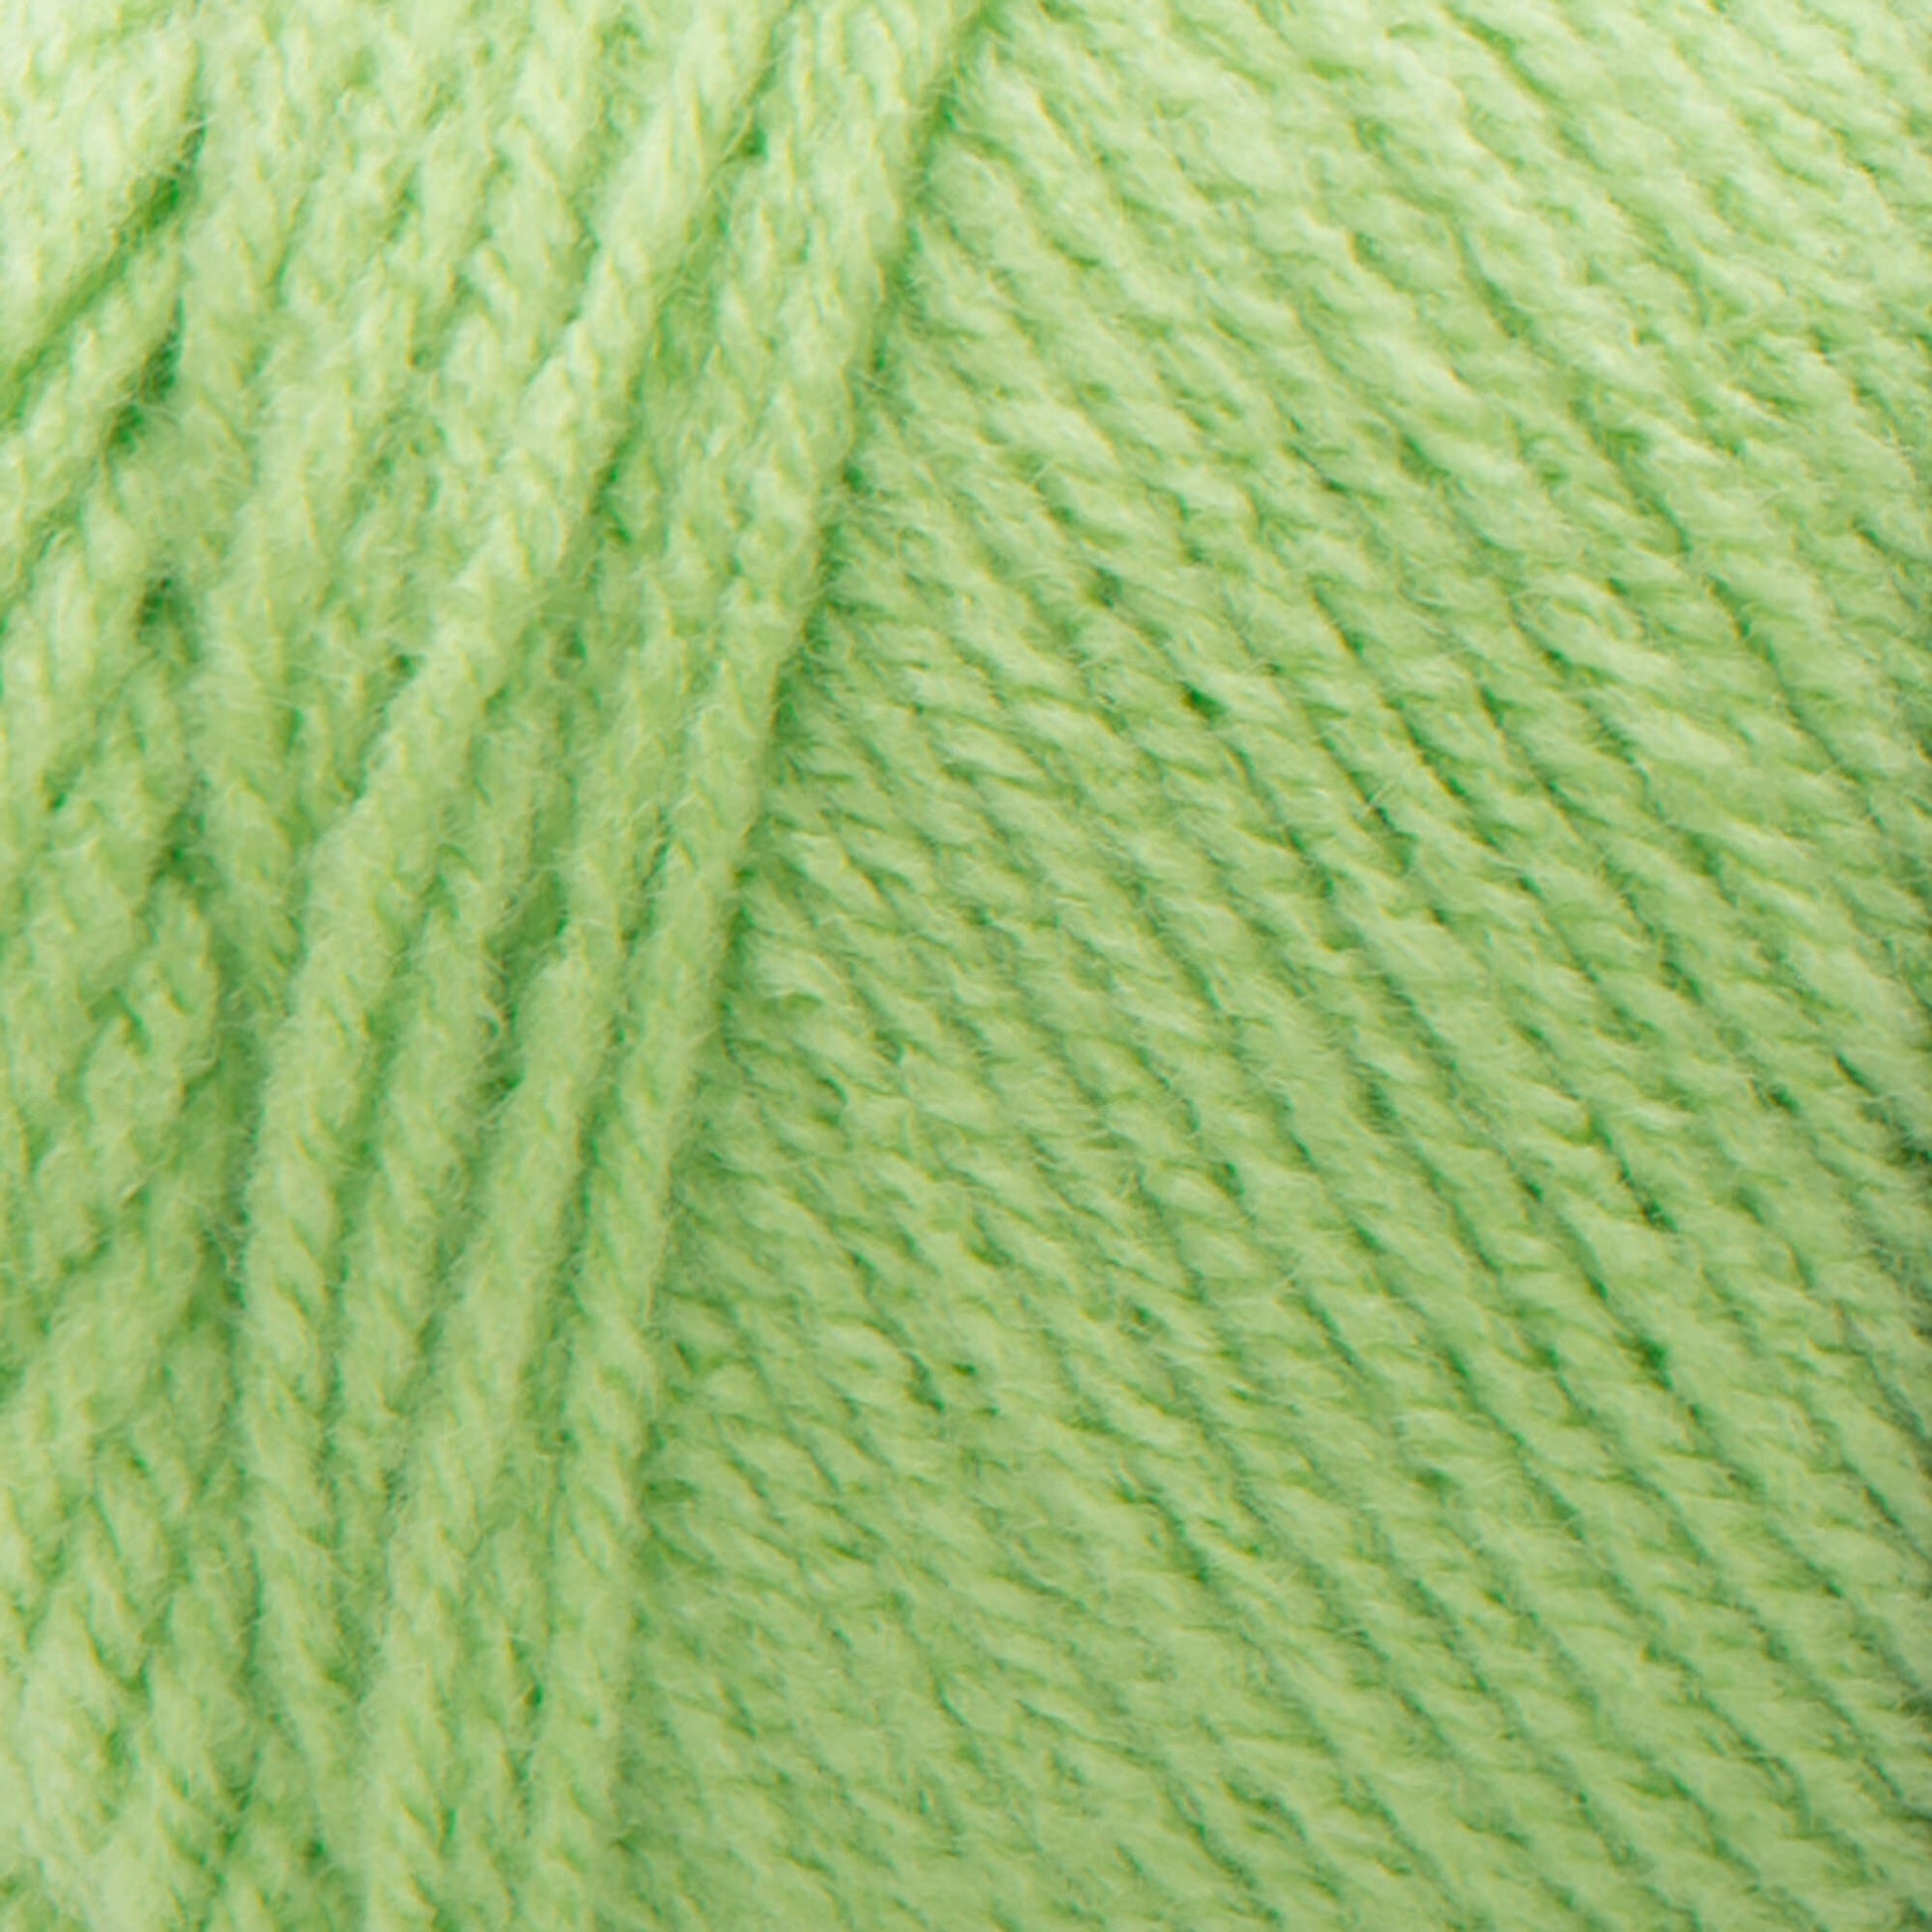 Red Heart Classic Yarn - Clearance shades Lime